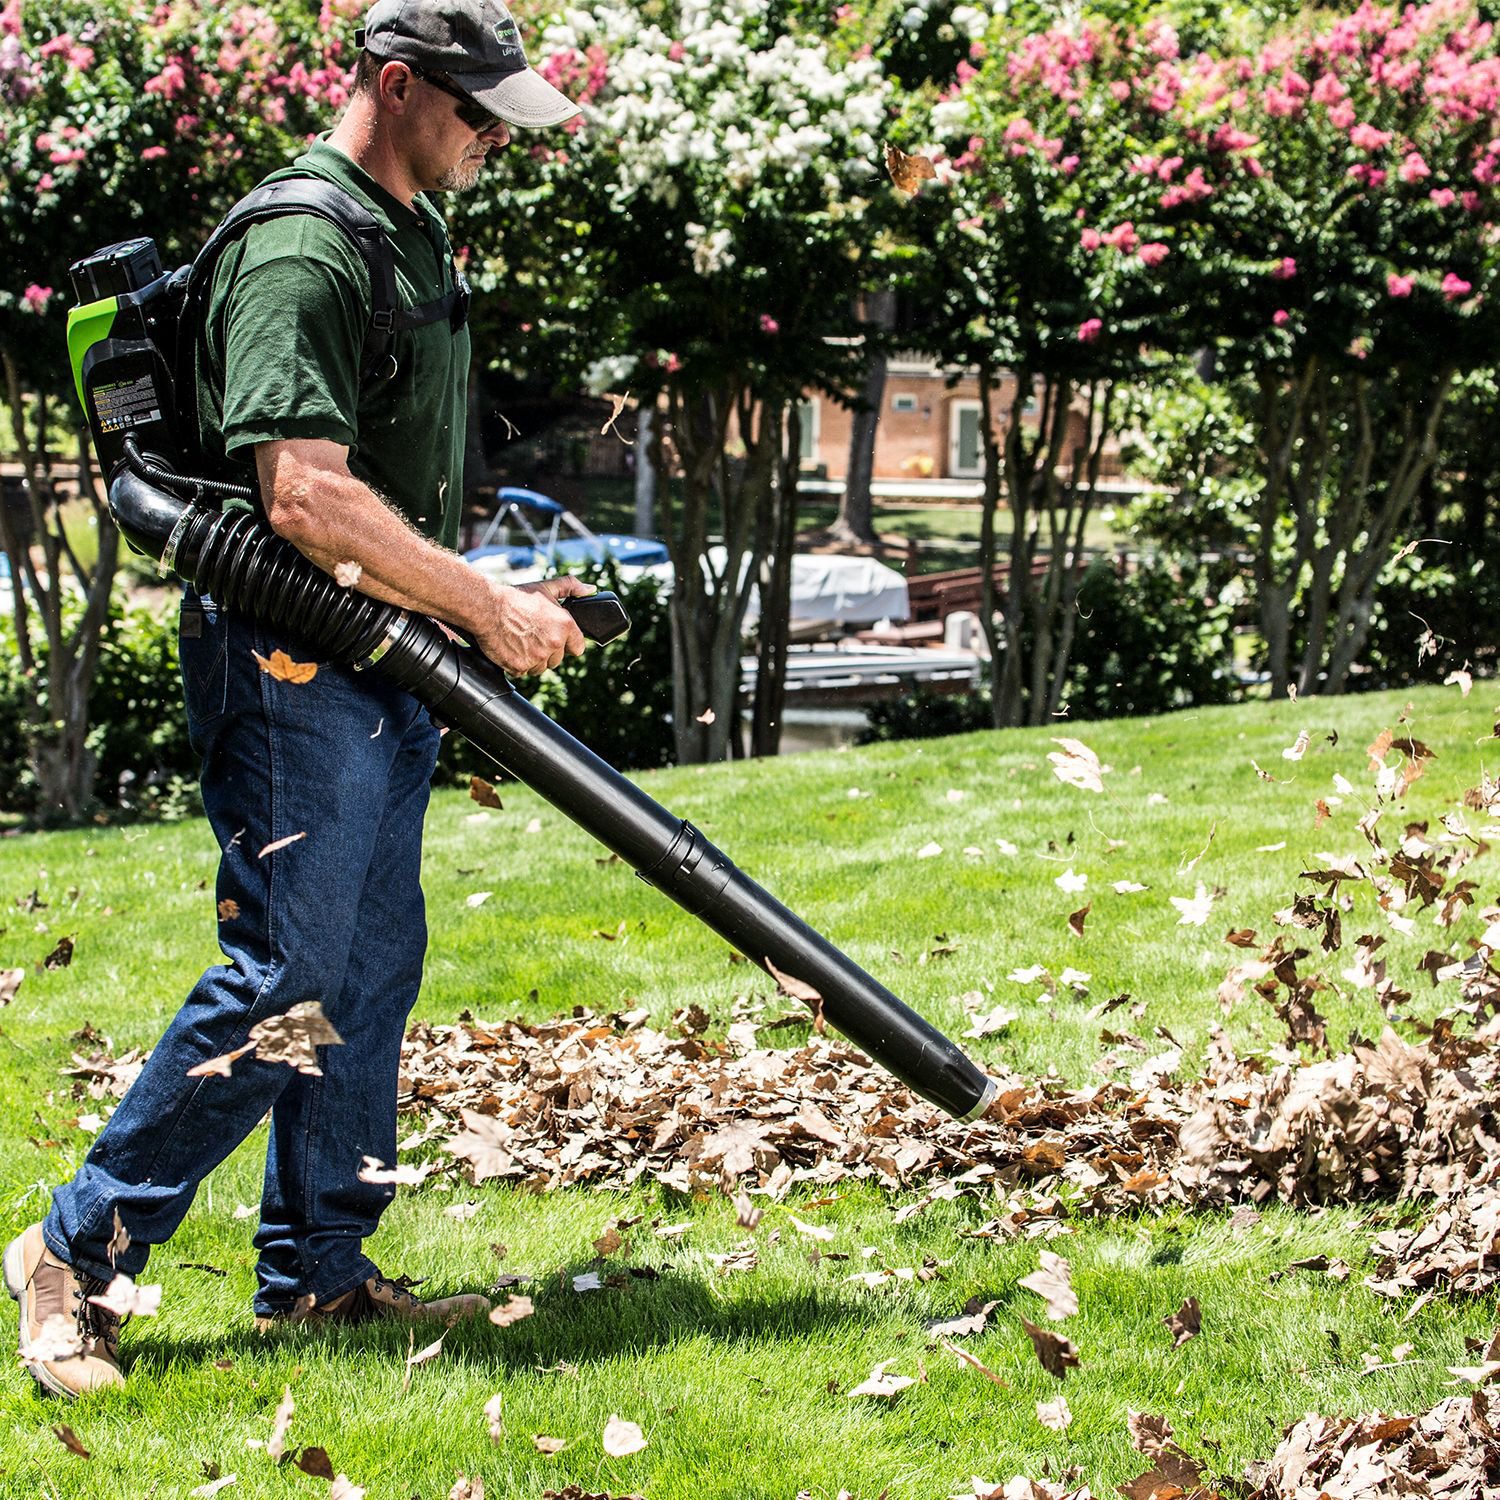 5 Tips To Keep In Mind When Using Backpack Leaf Blowers In Your Garden